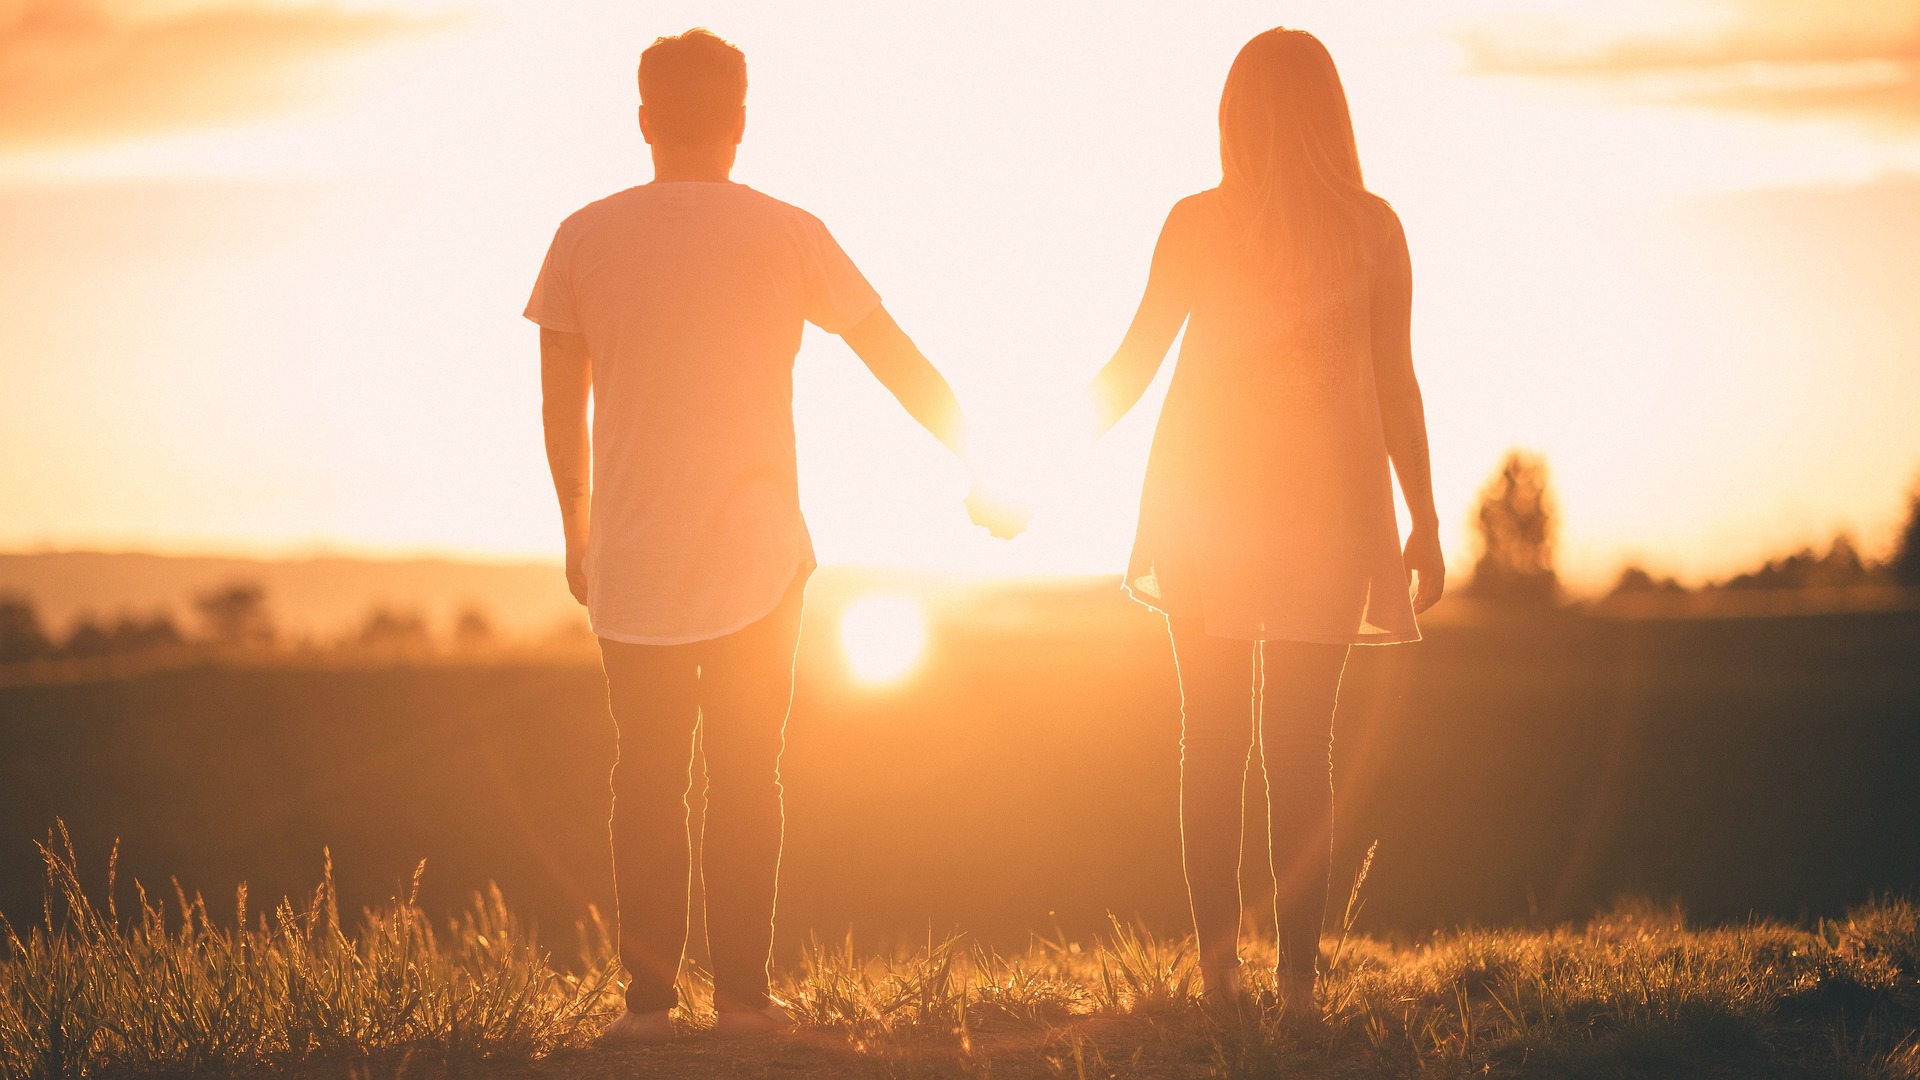 A couple holding hands looking at the sunset | July 31, 2017 | StockSnap | Courtesy of Pixabay